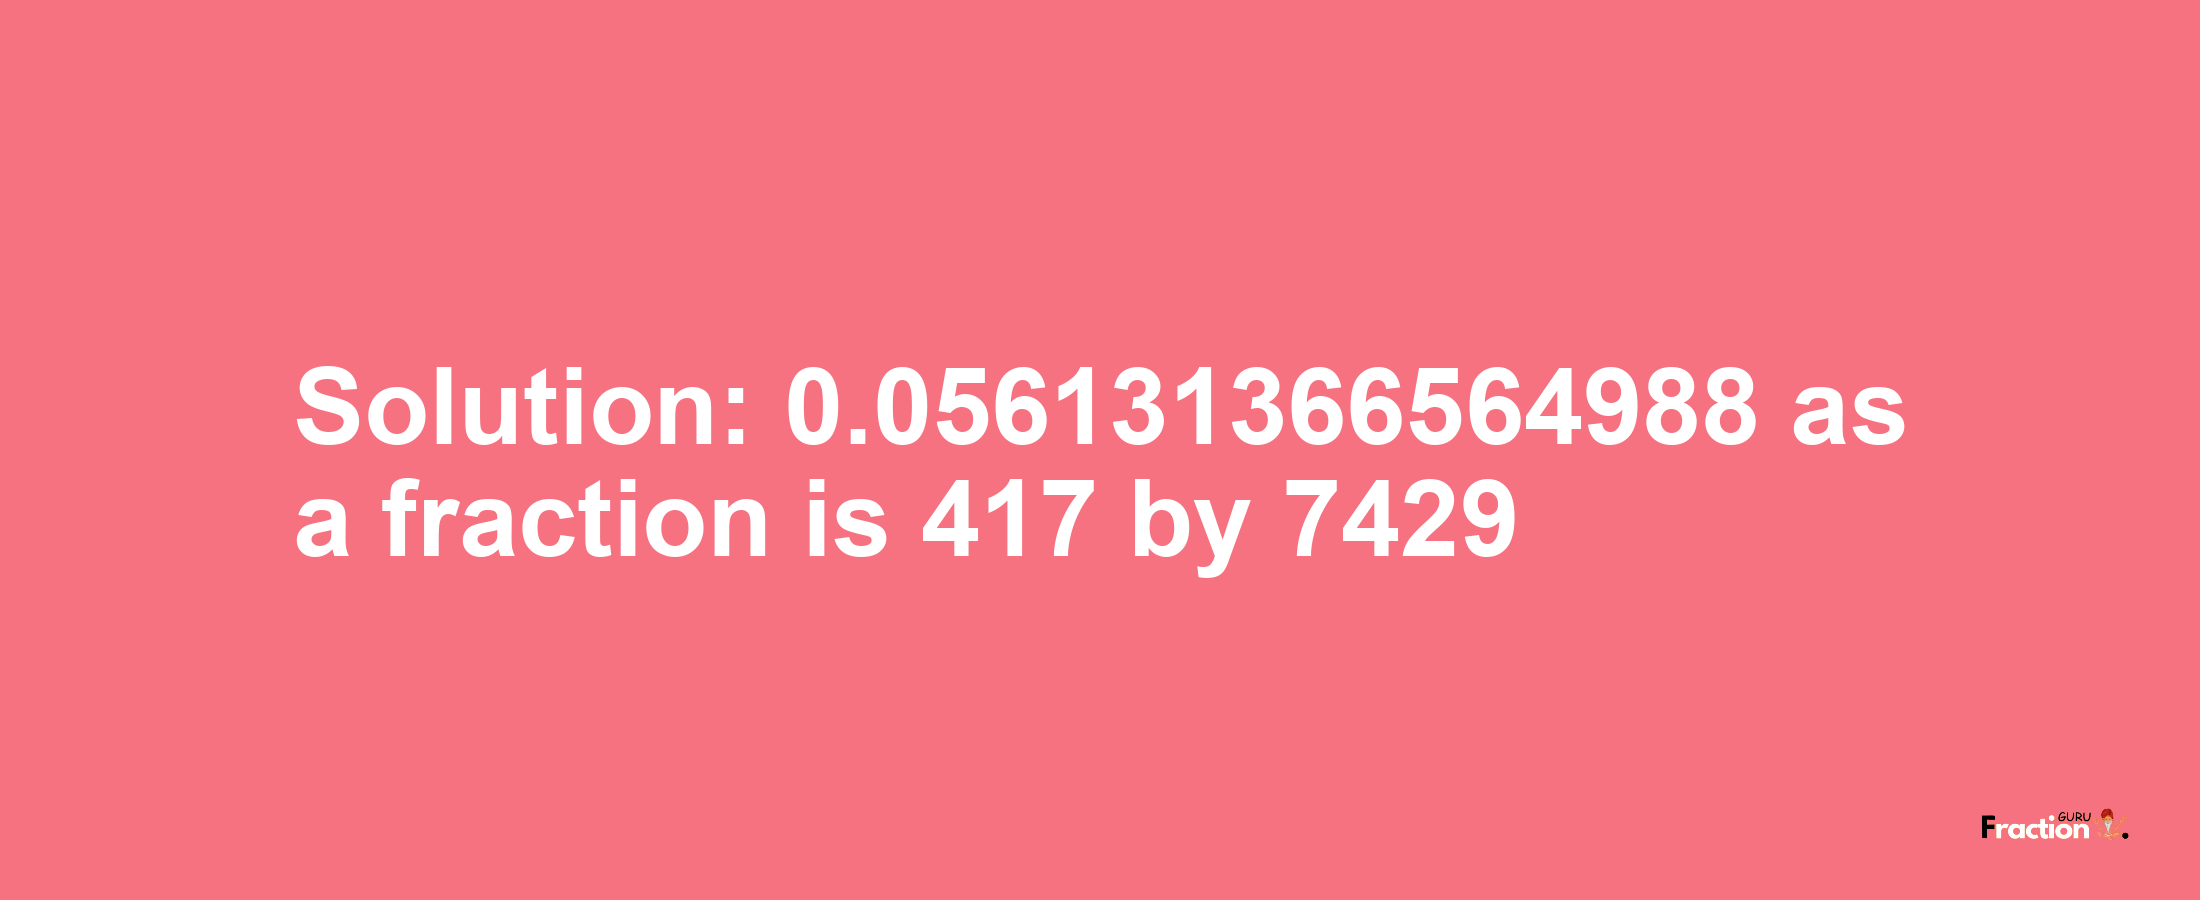 Solution:0.056131366564988 as a fraction is 417/7429